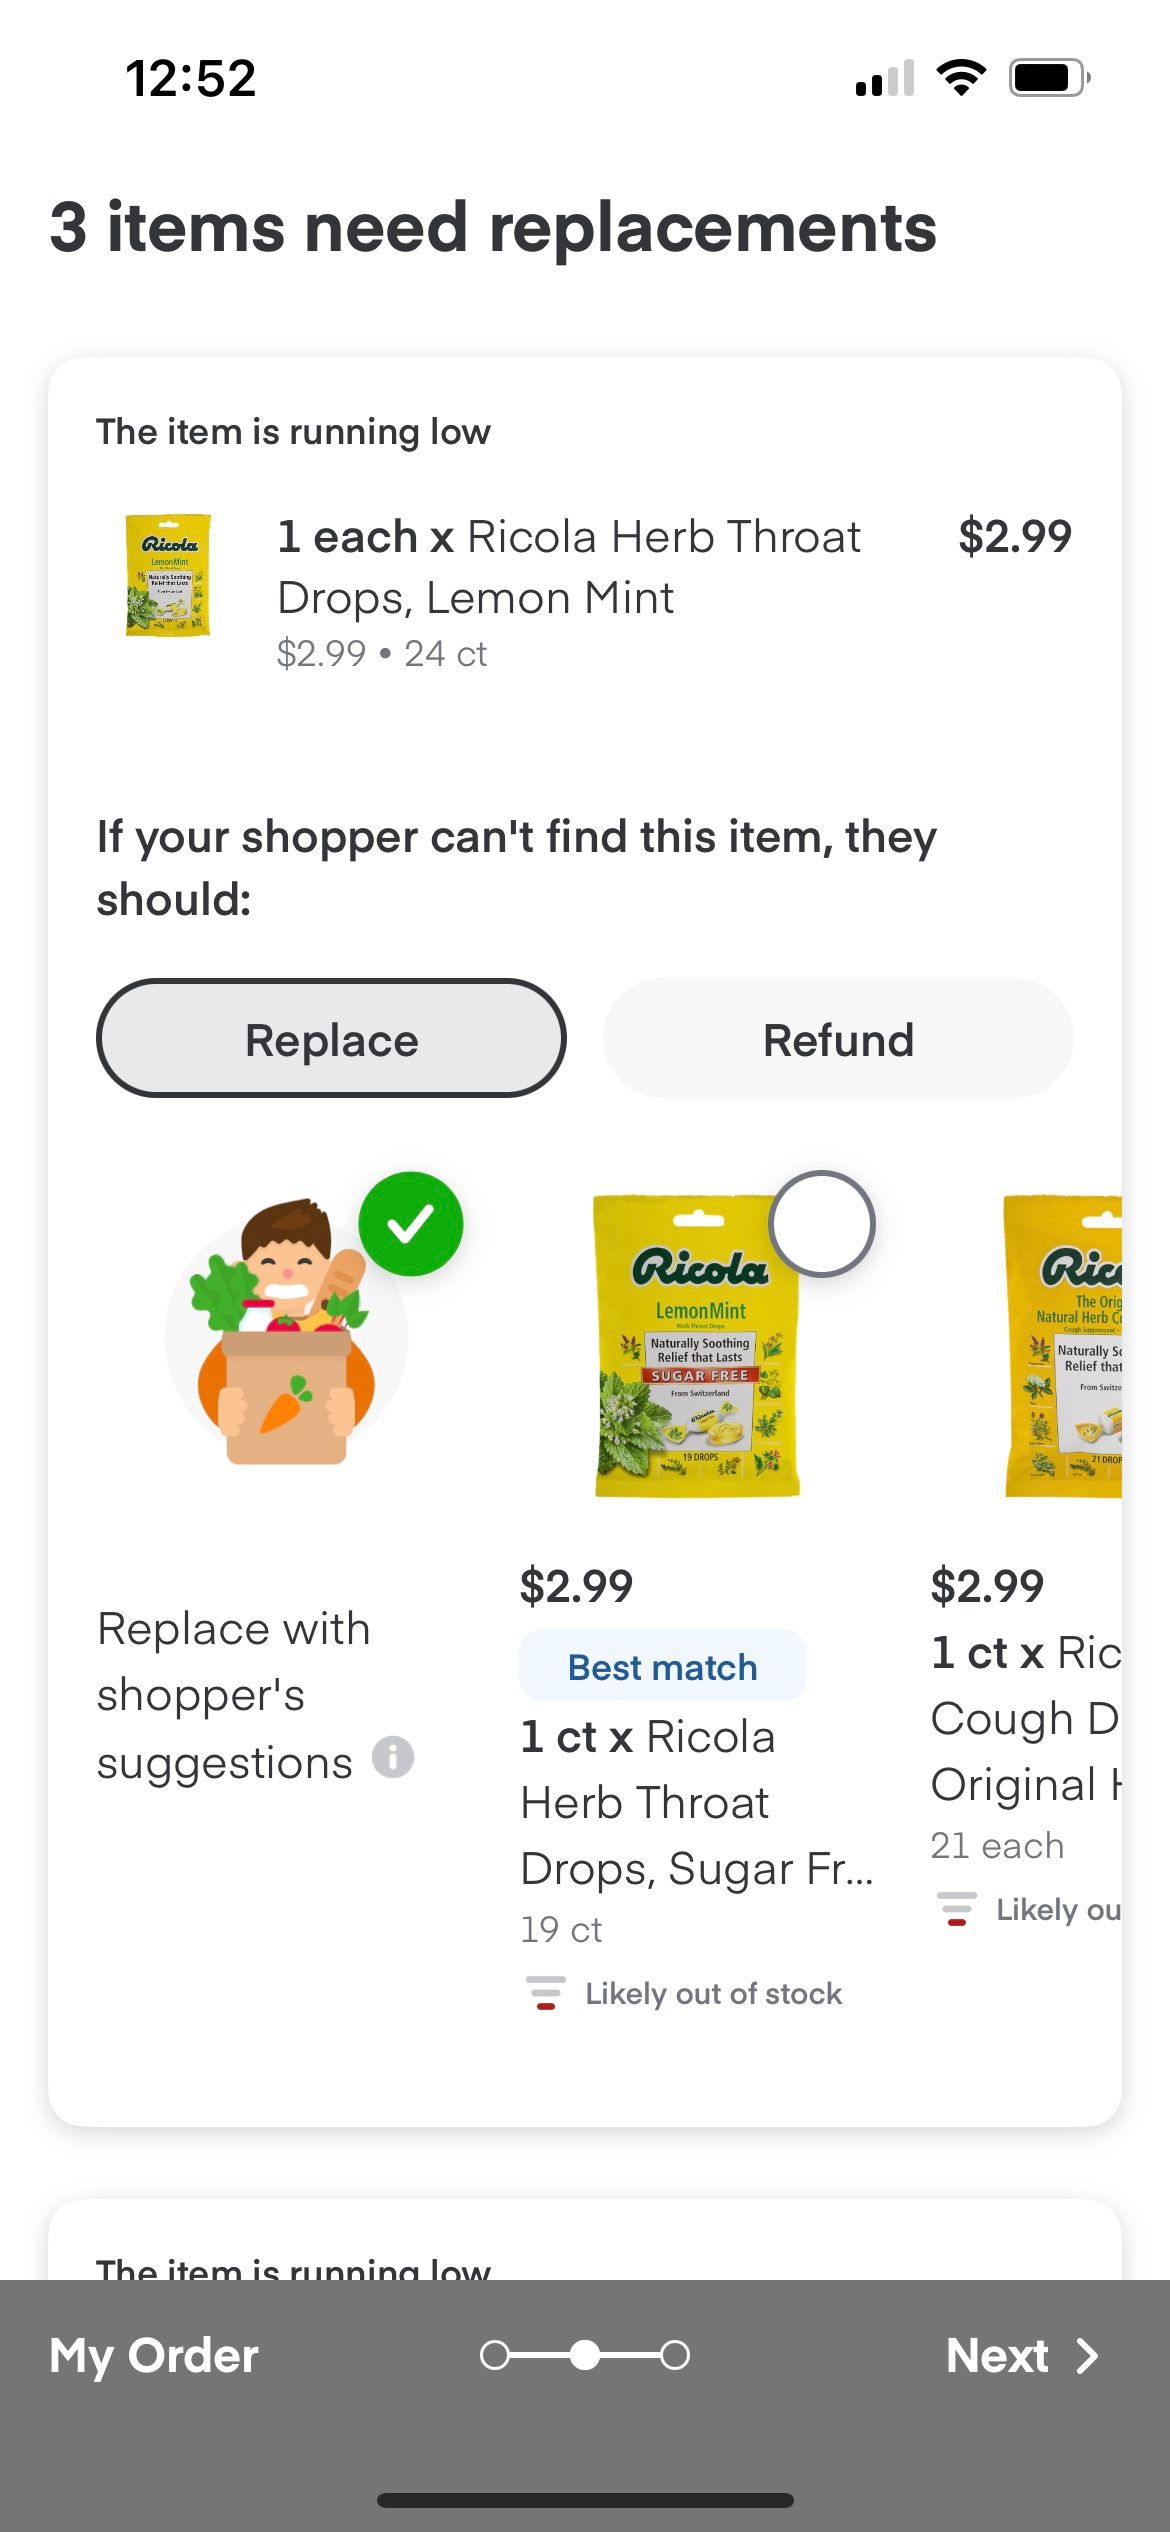 How Is Instacart for Same-Day Grocery Shopping?